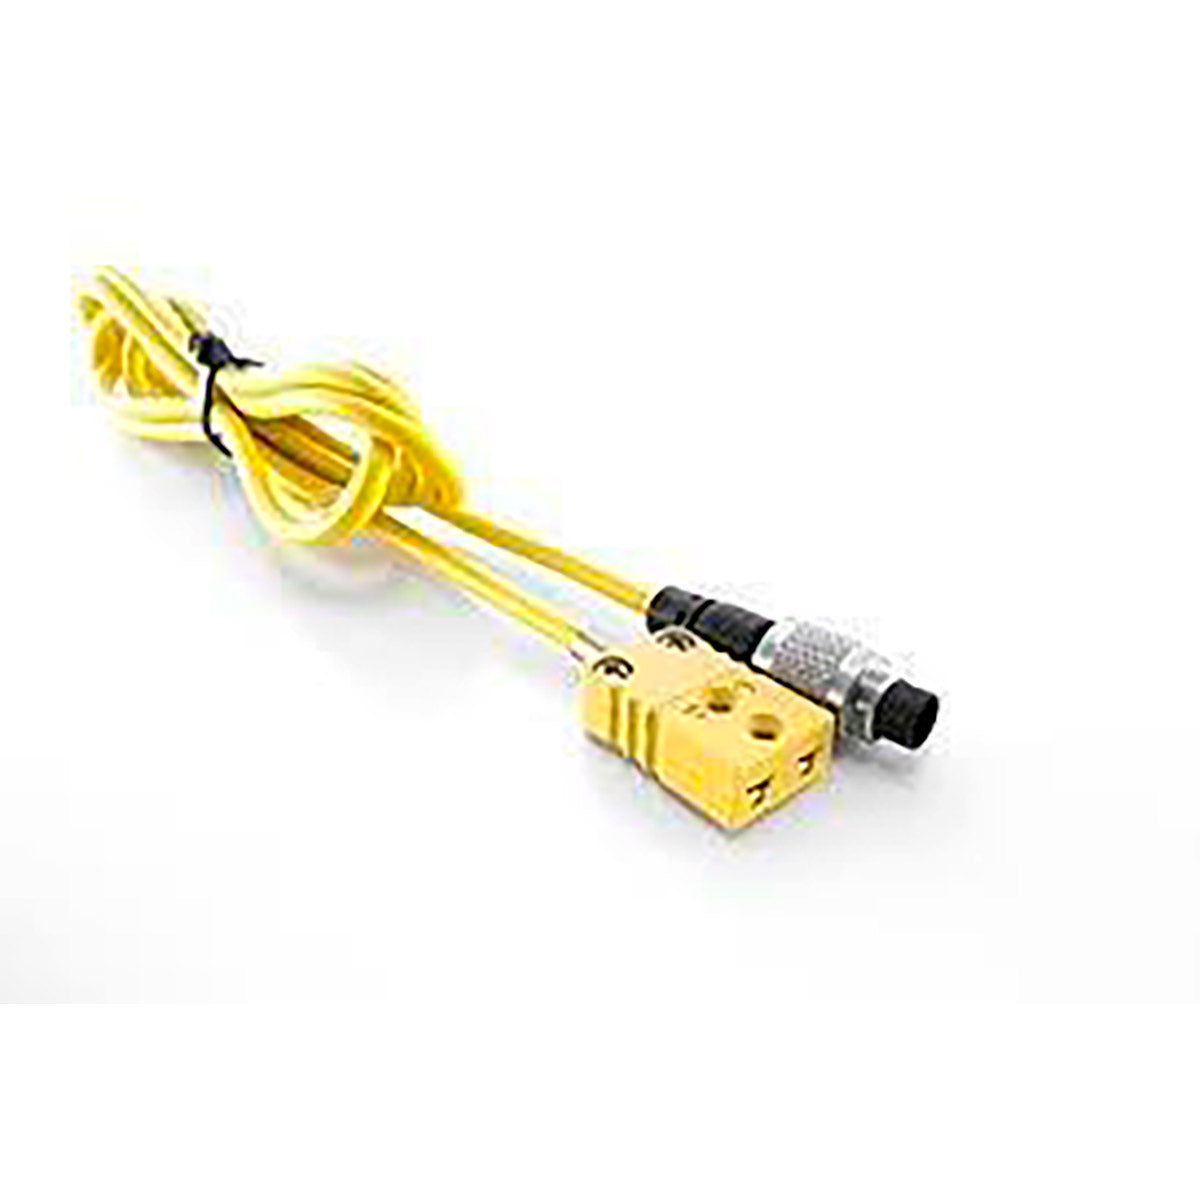 MyChron Temp Extension Cable - 1 x Yellow Square K Type Connector